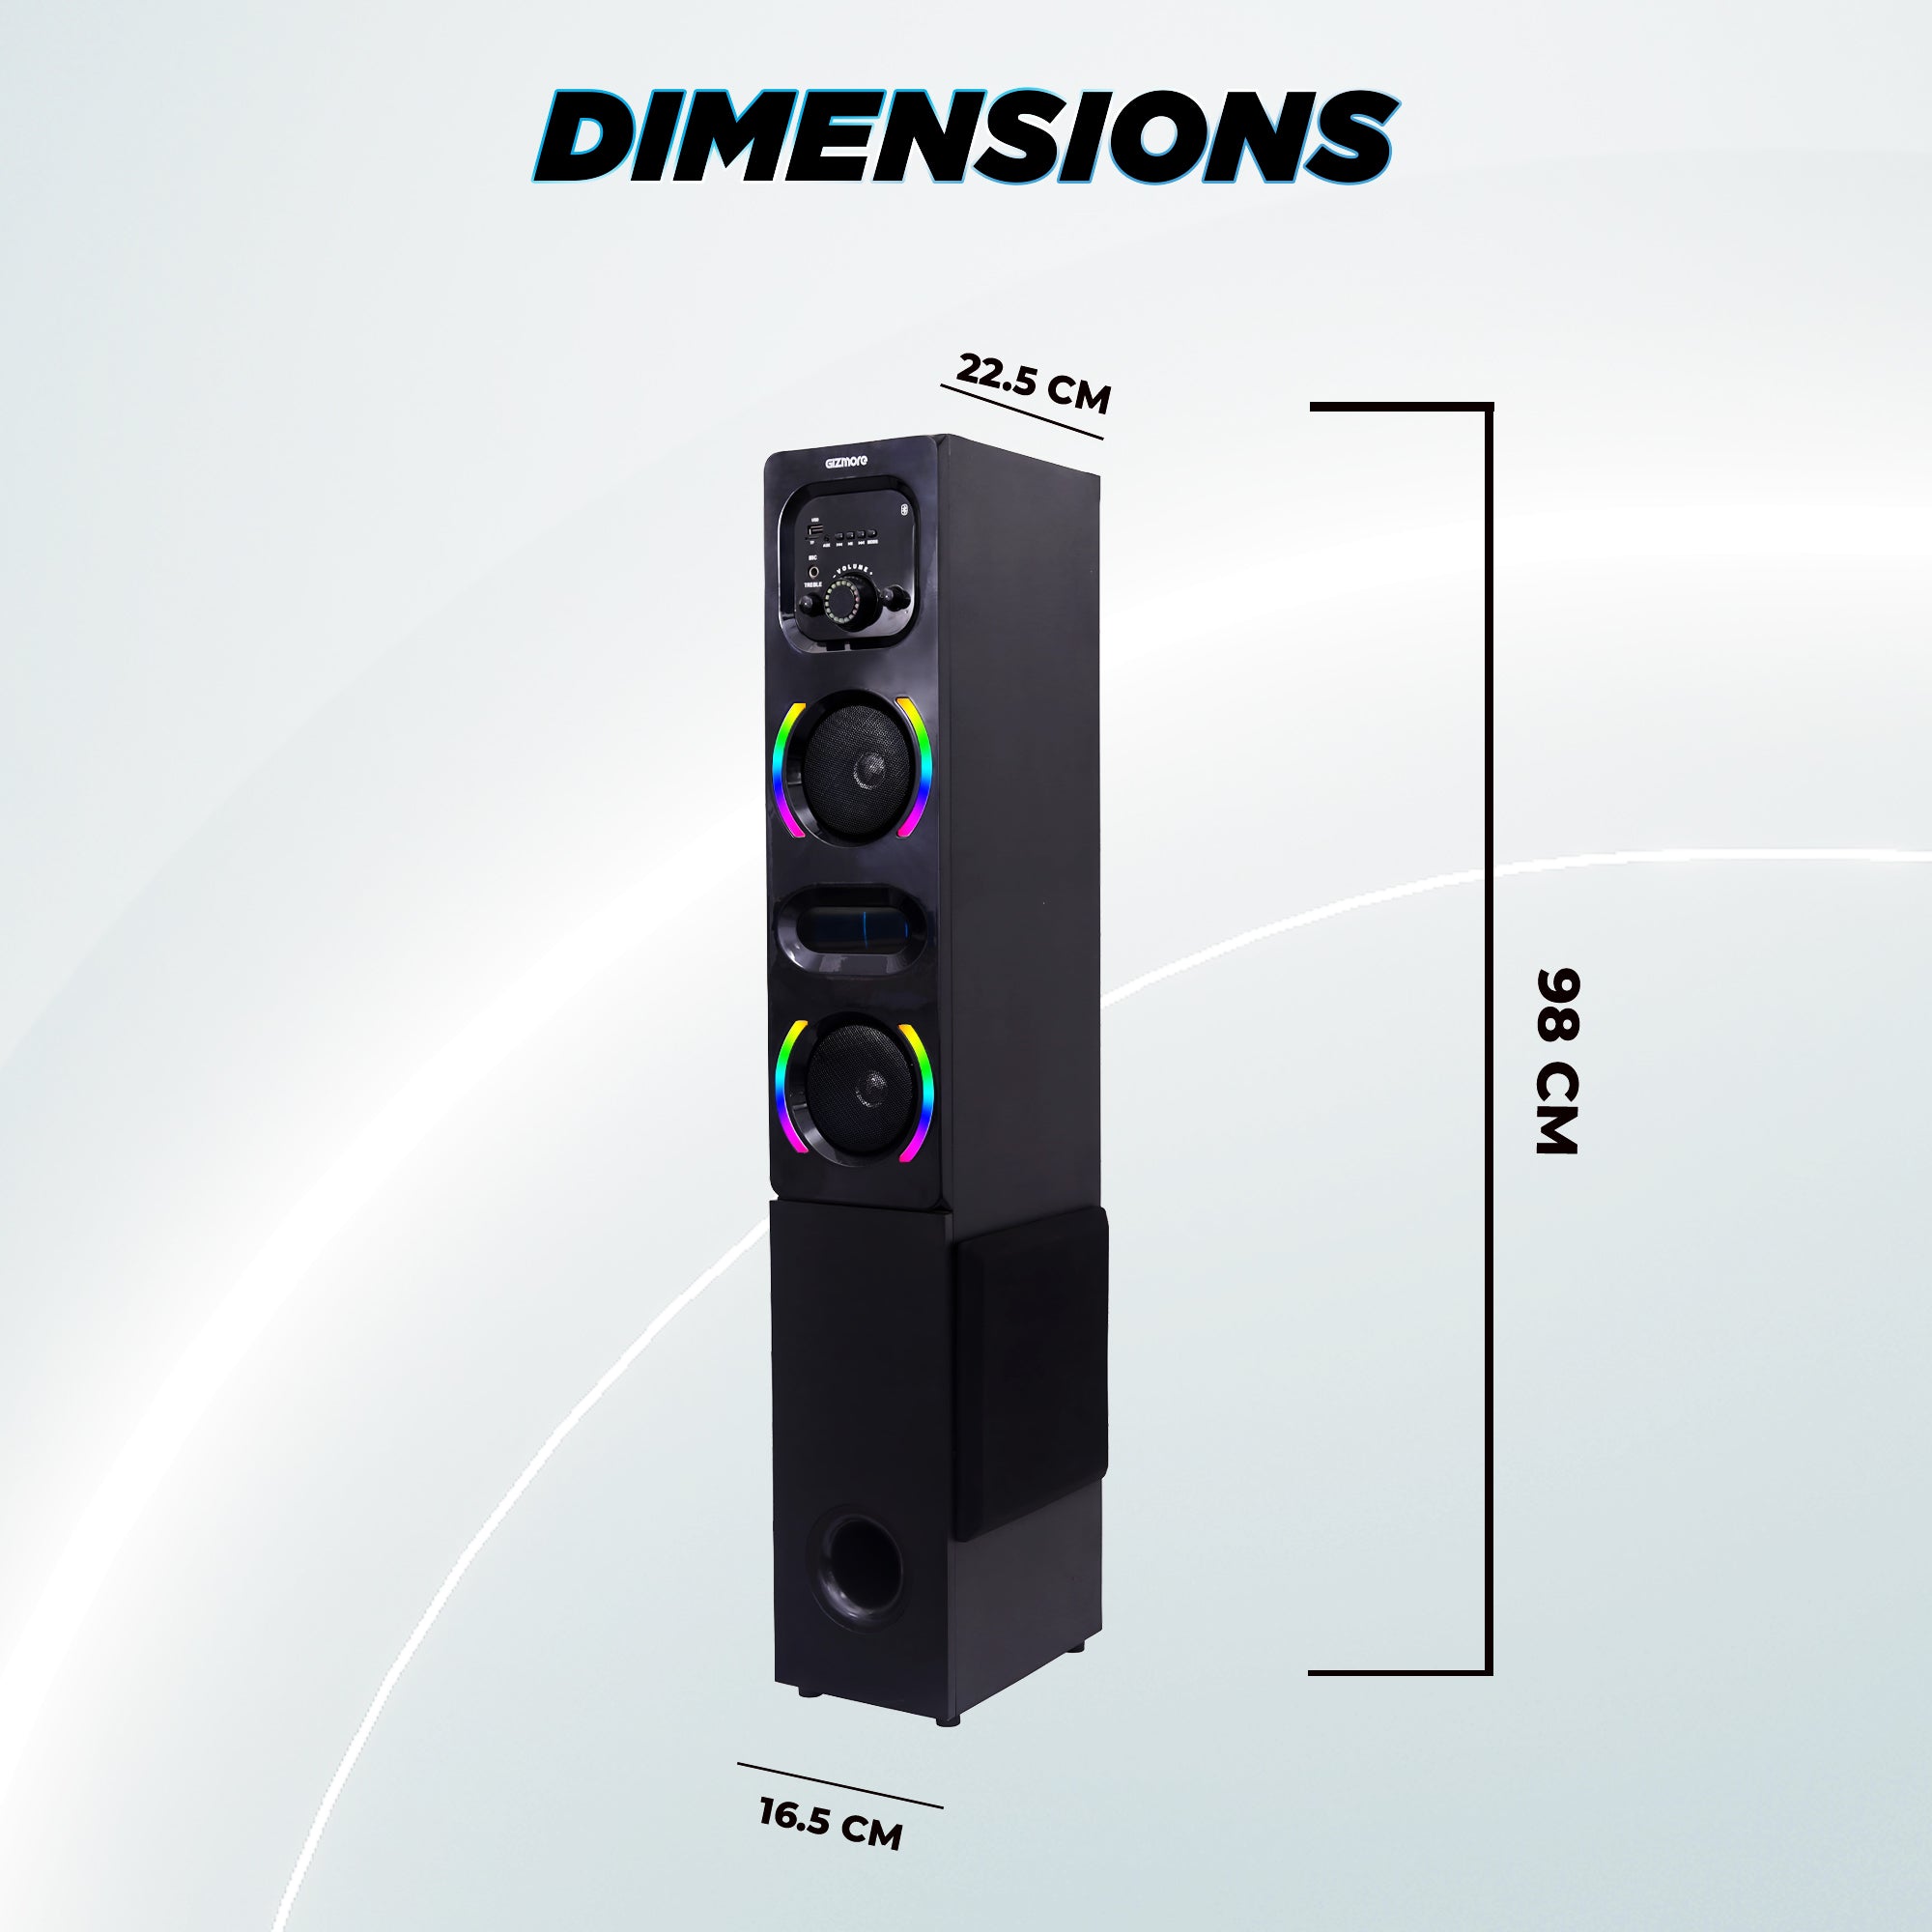 GIZMORE ST9000 100W DJ Tower Speaker | Digital LED Display & RGB Lights | Wireless MIC | Volume & Bass Control | Karaoke and Party Speaker with Multiple Connectivity